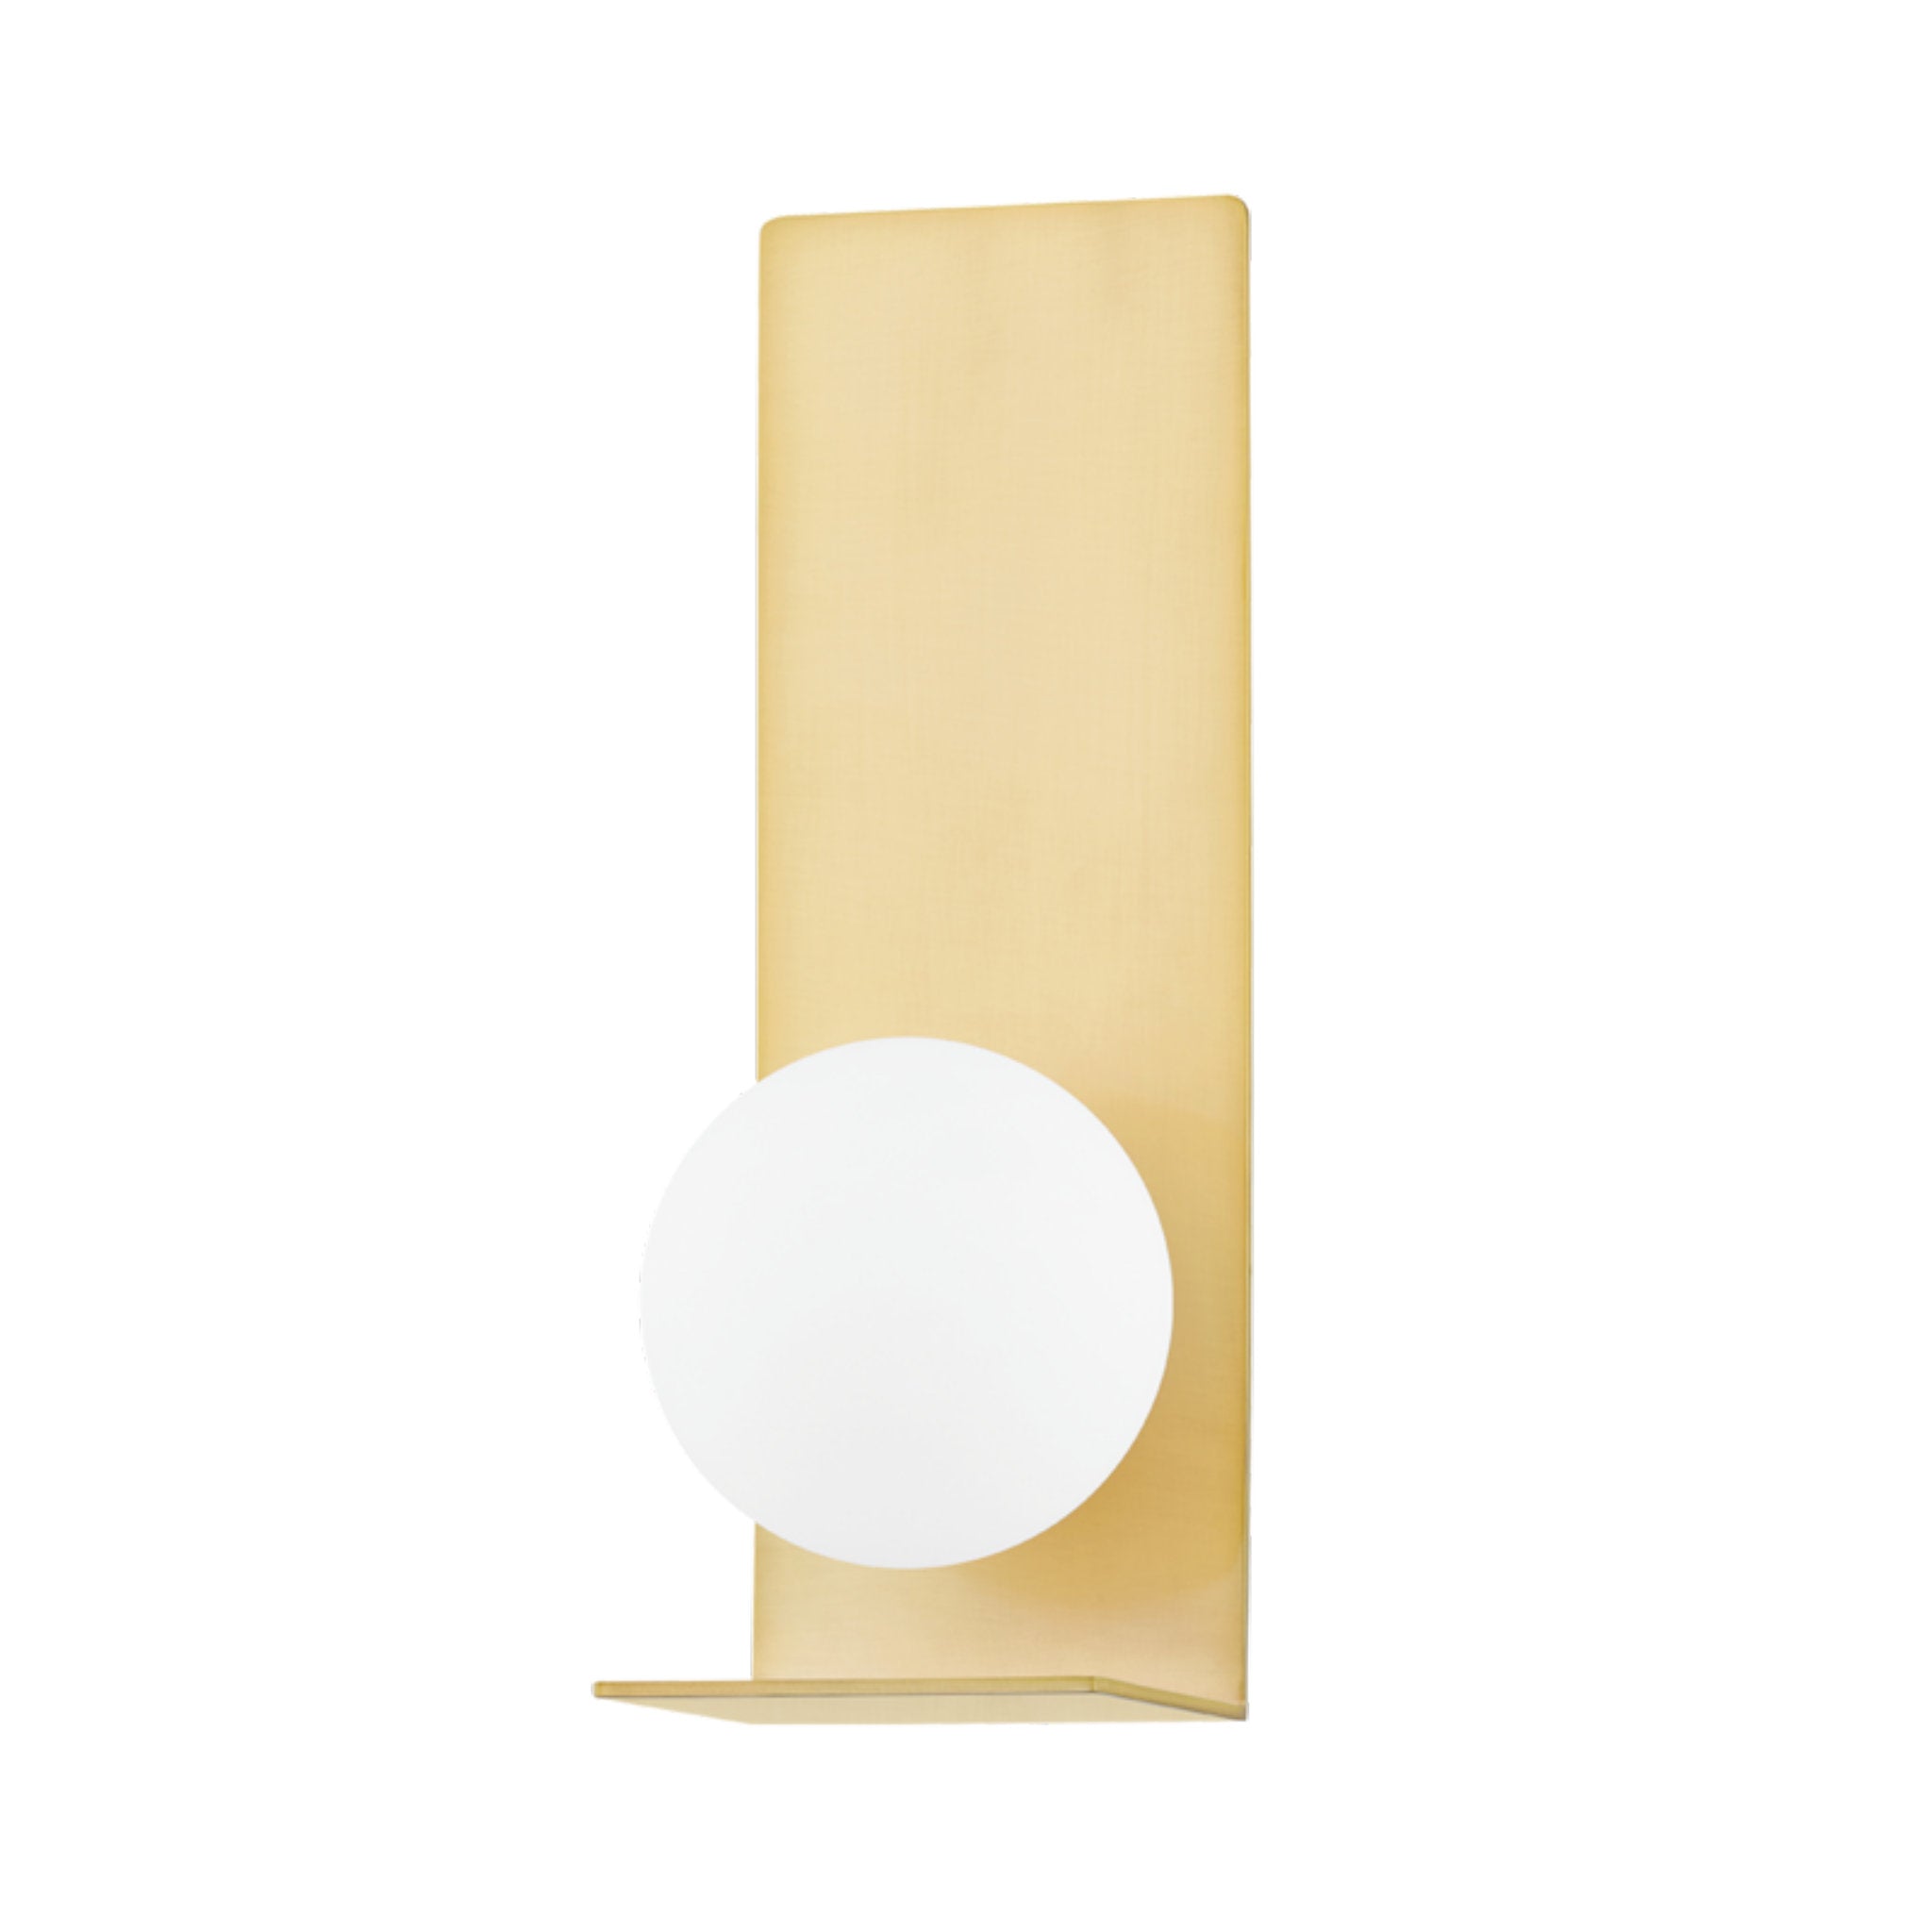 Lani 1-Light Wall Sconce in Aged Brass